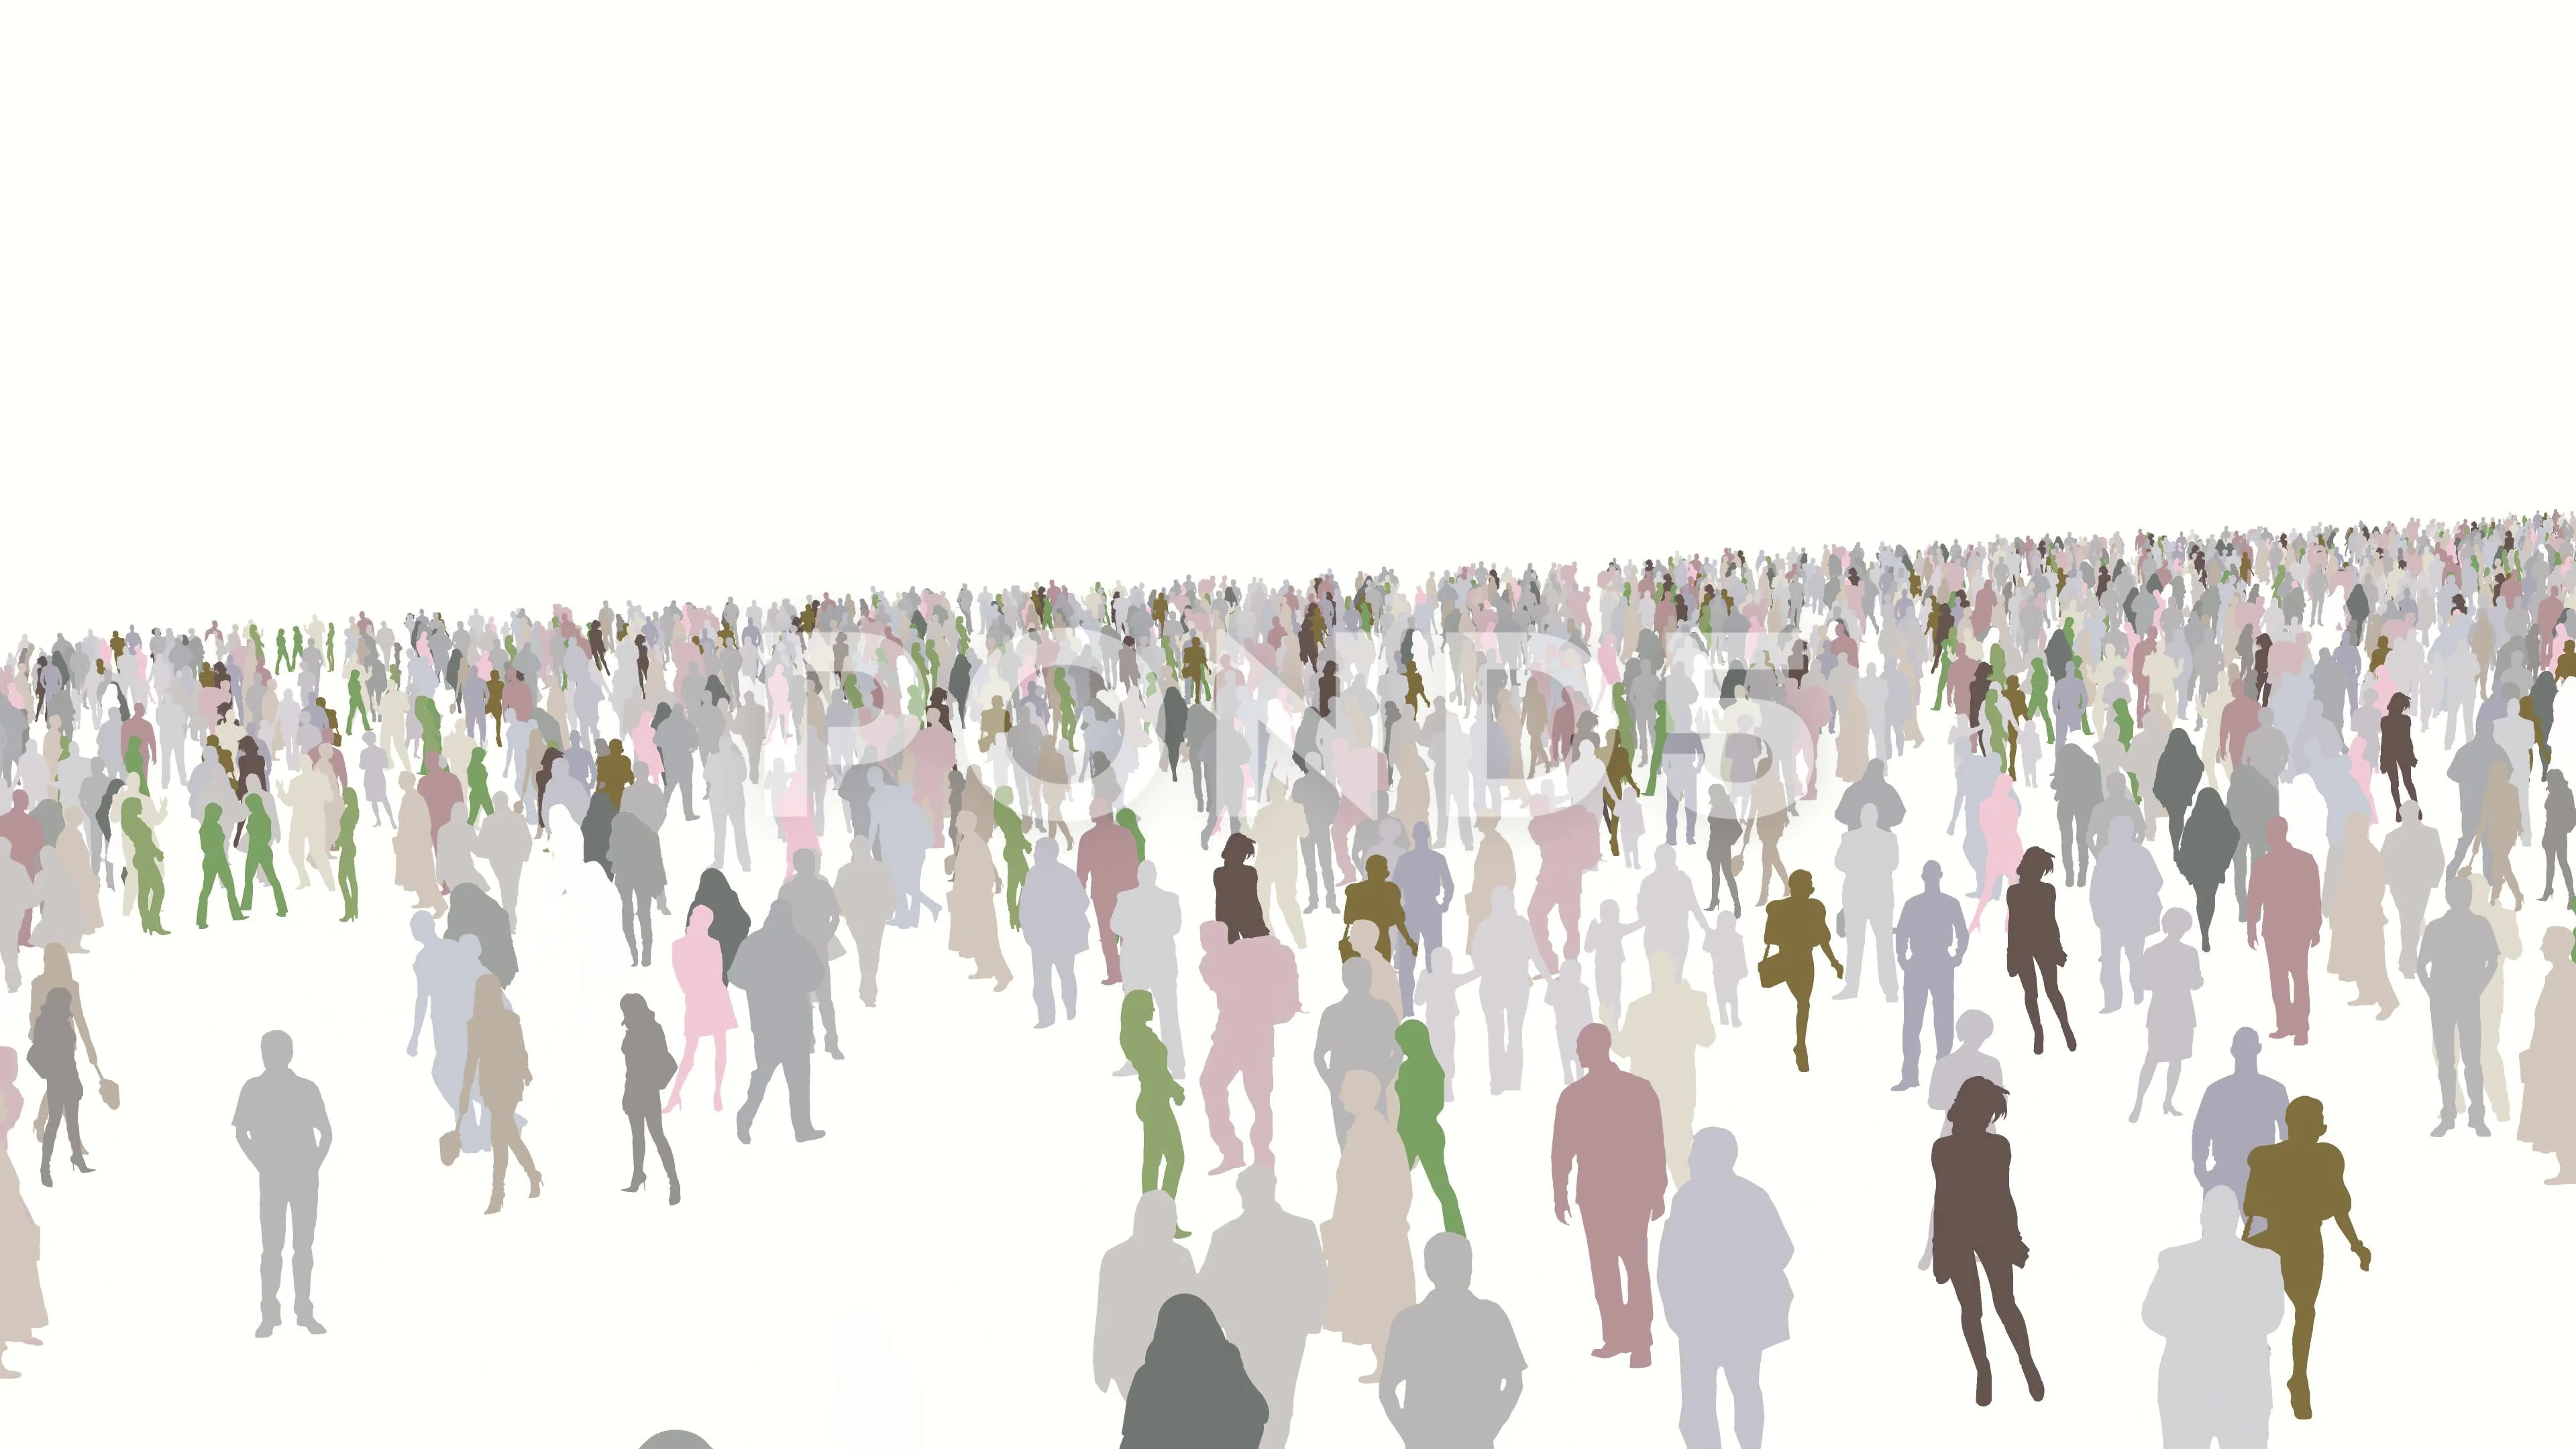 animations of people